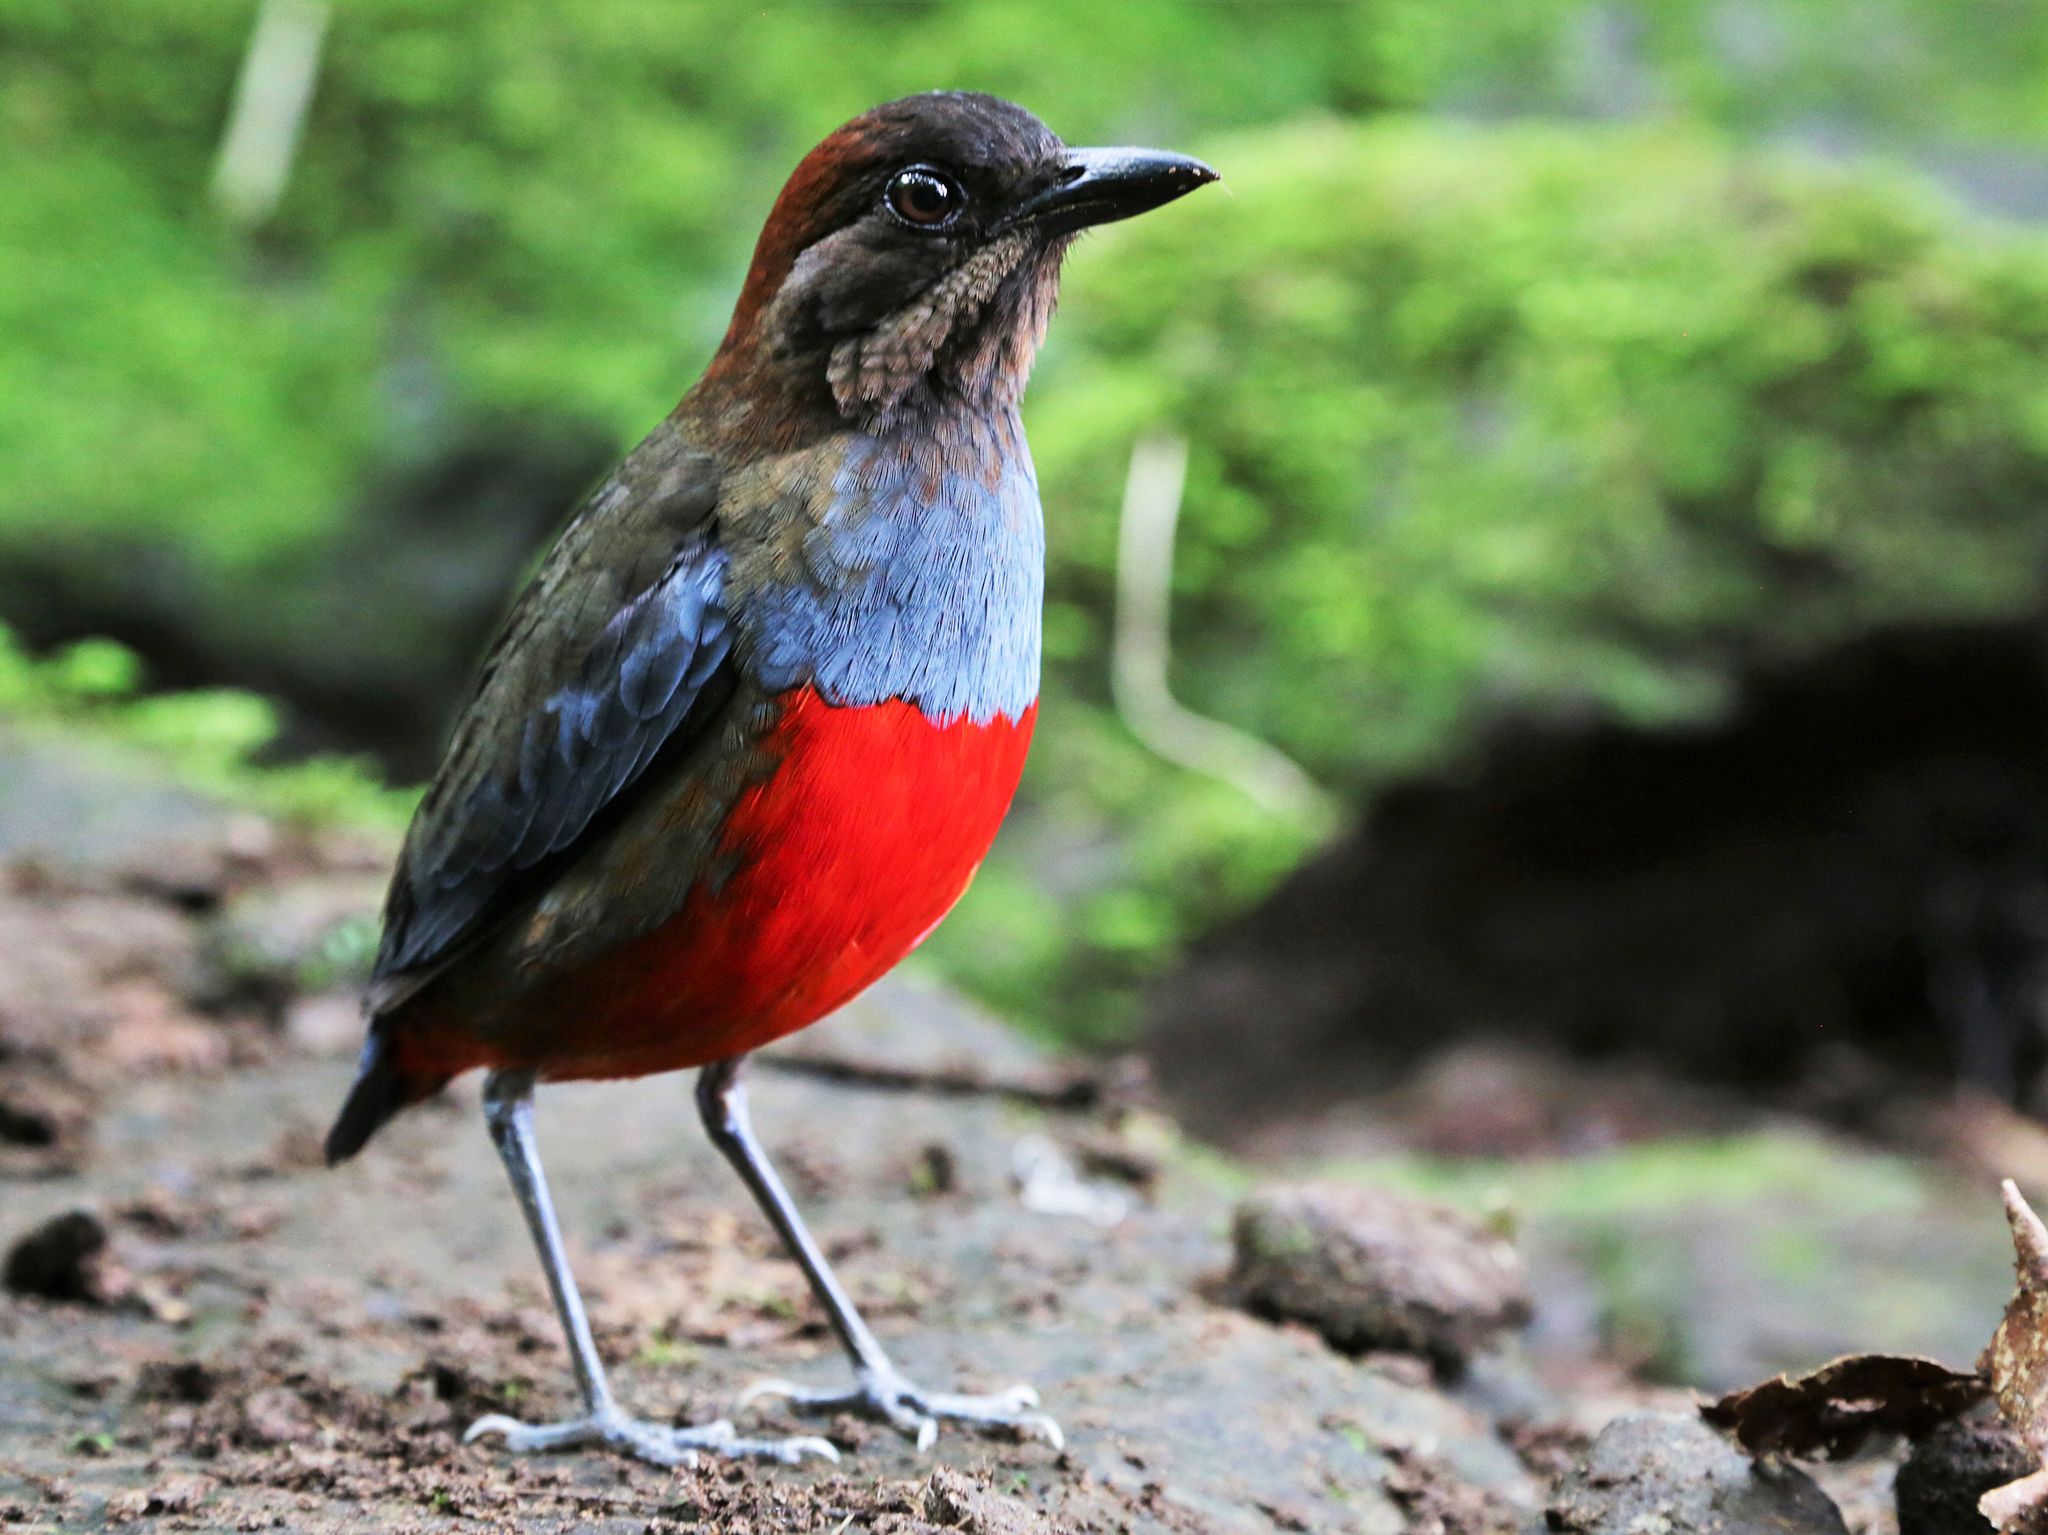 Luzon, Philippines:  Whiskered pitta.  This image is from Untamed Philippines. [Photo of the day - June 2020]